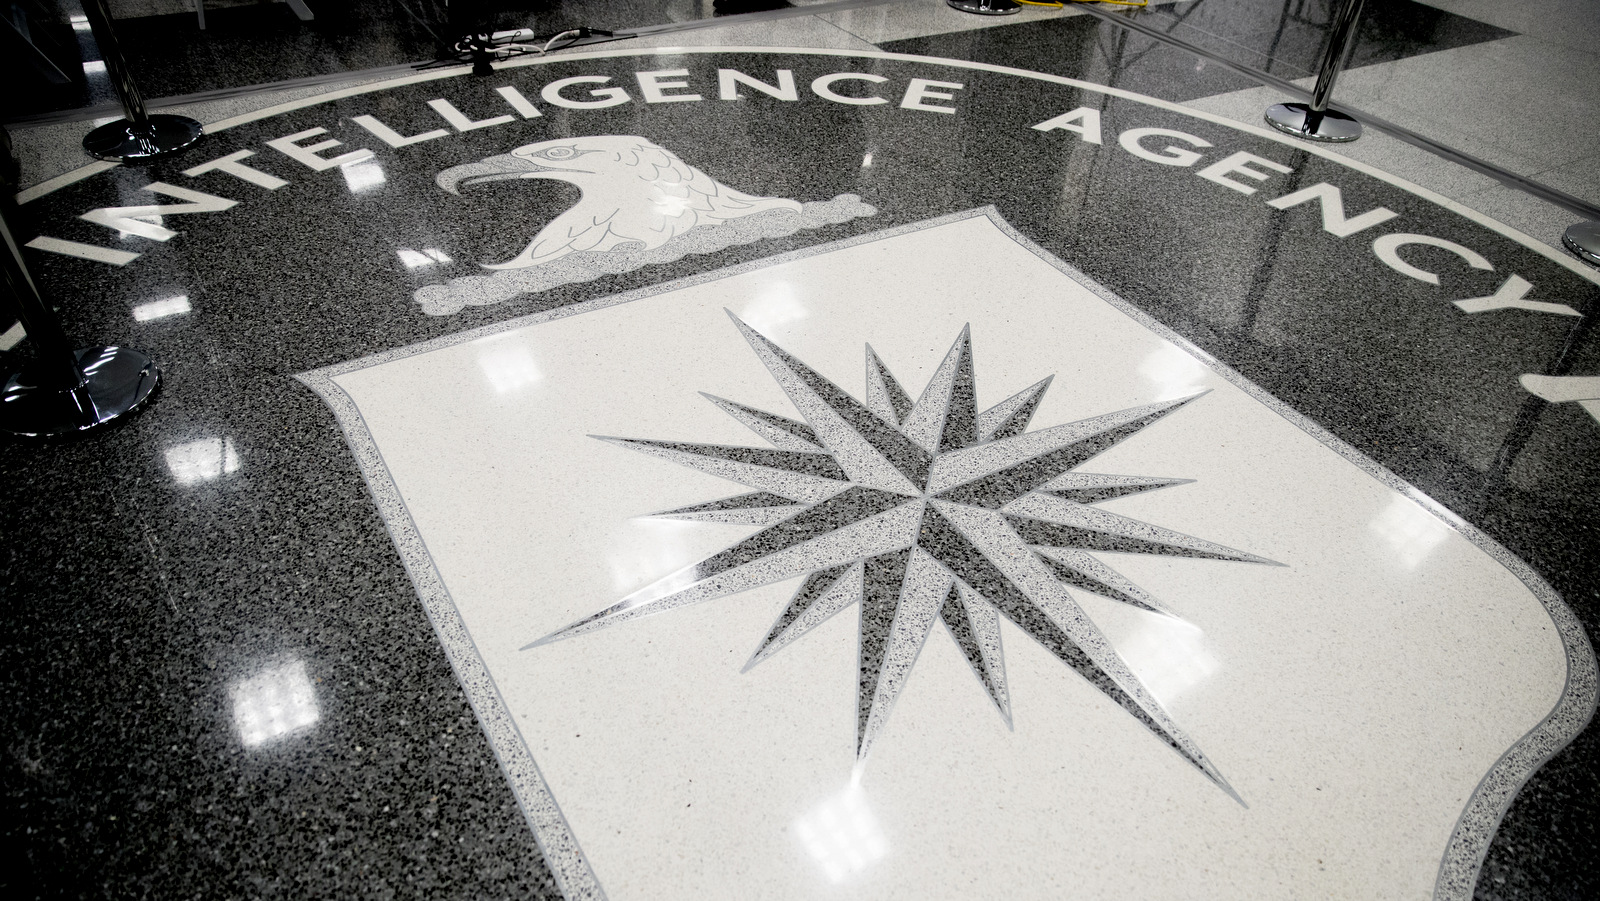 The floor of the main lobby of the Central Intelligence Agency in Langley, Va., Saturday, Jan. 21, 2017. (AP/Andrew Harnik)